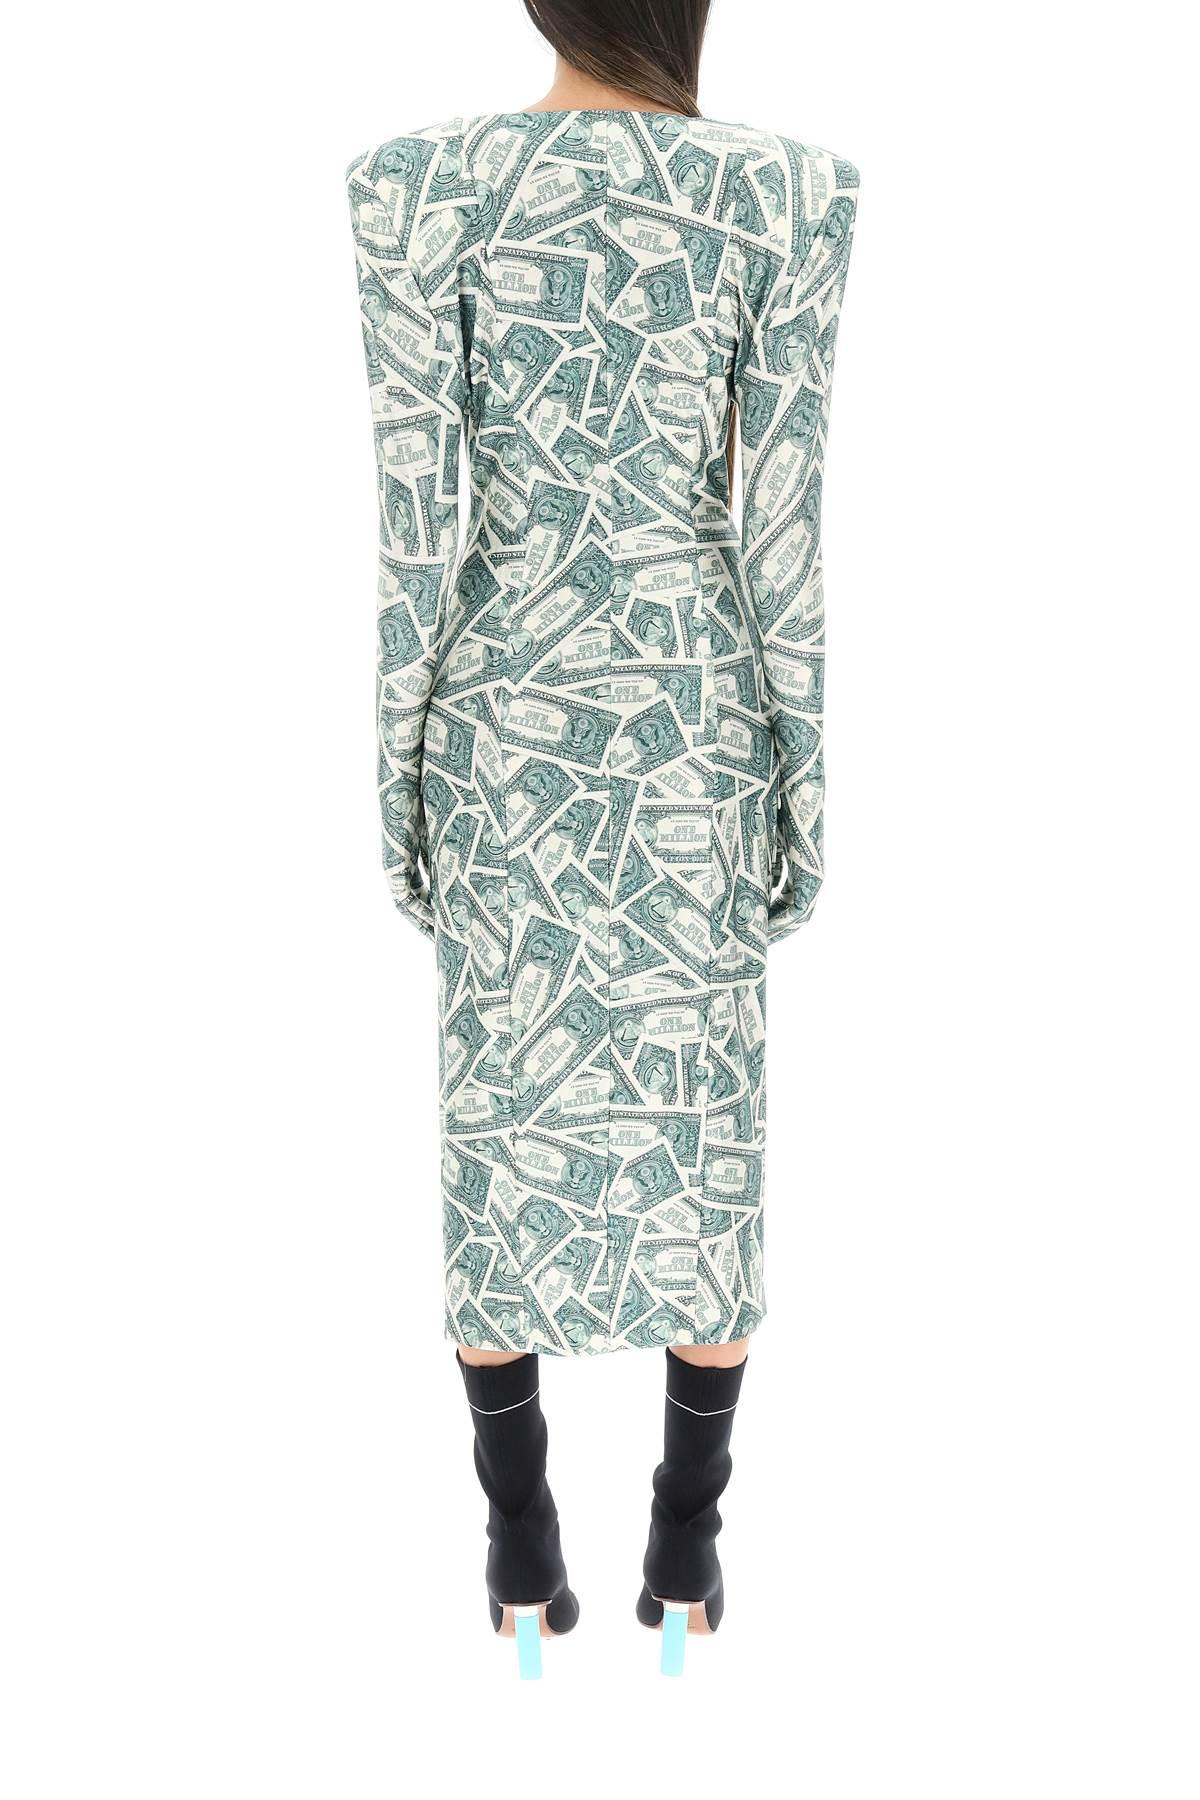 Vetements 'dinasty' Long Dress With Million Dollar Print in Green | Lyst